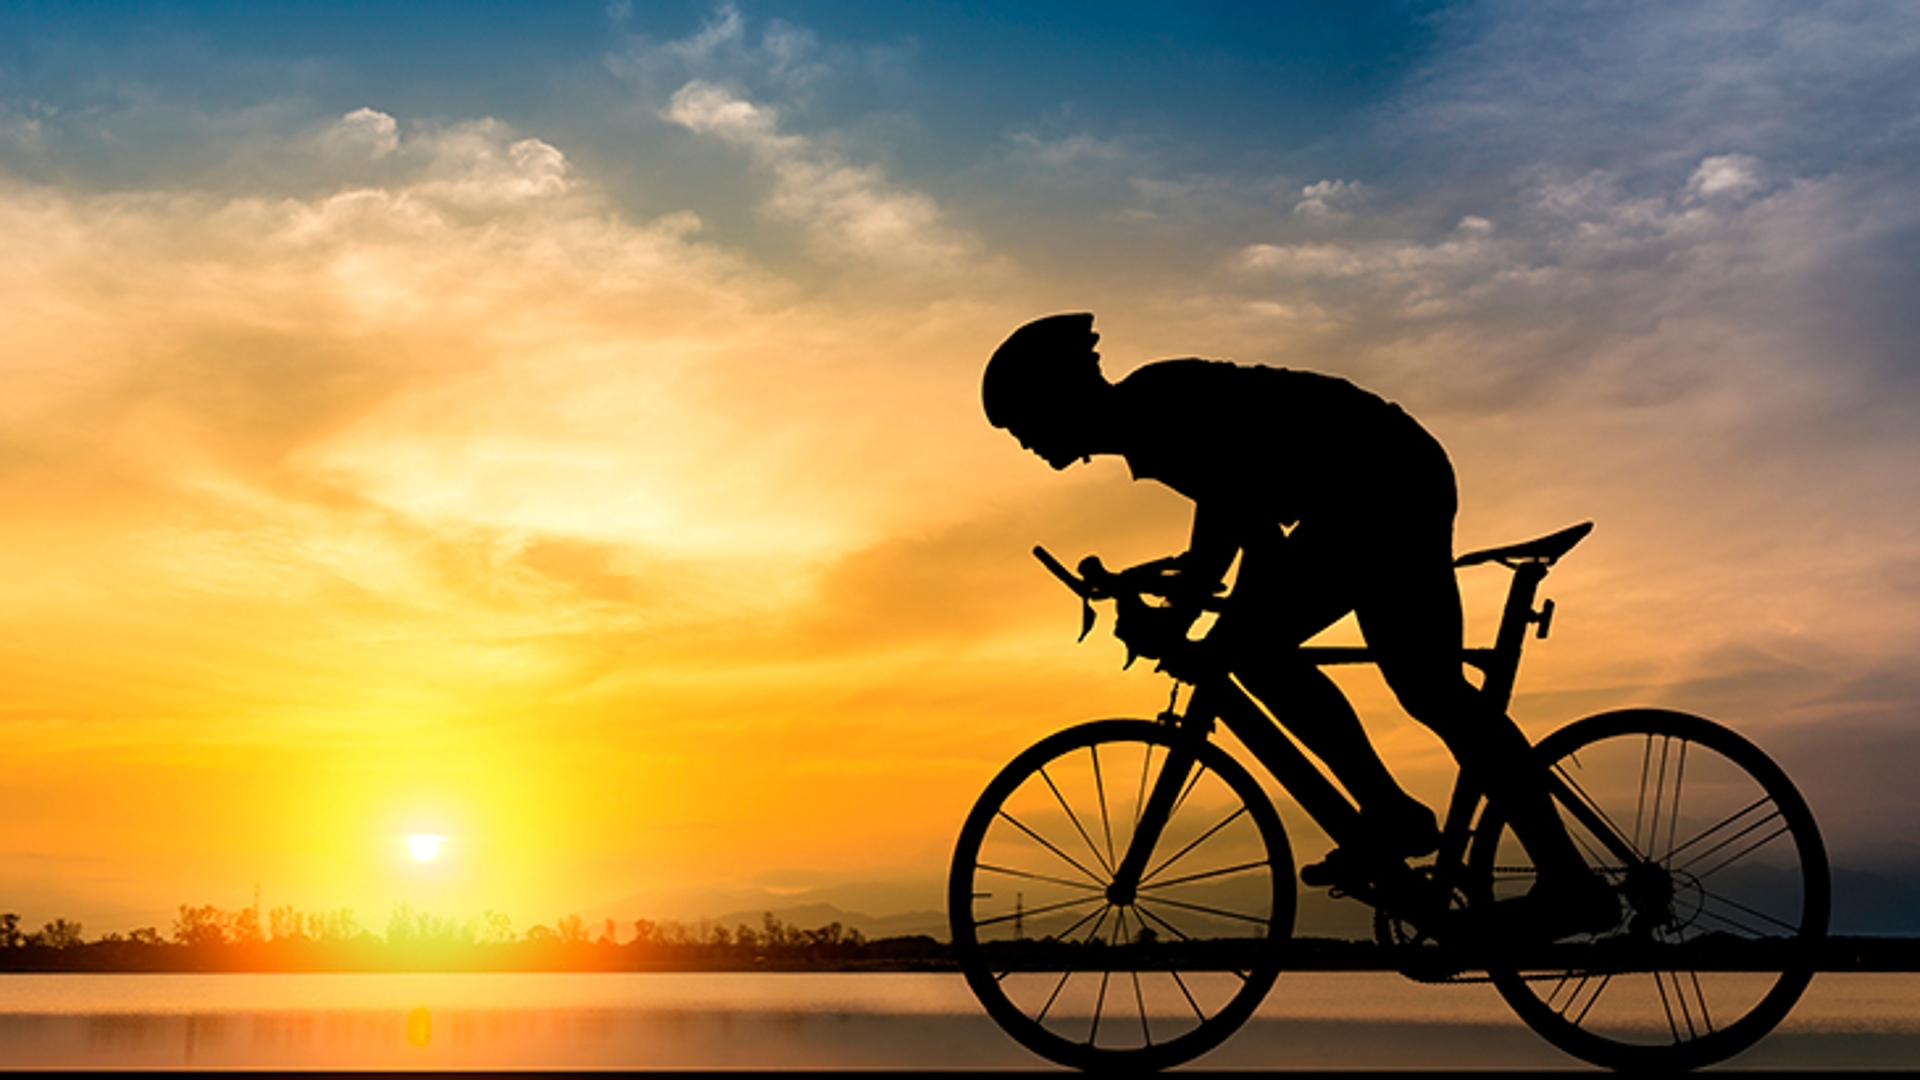 Bike rider silhouetted against a setting sun